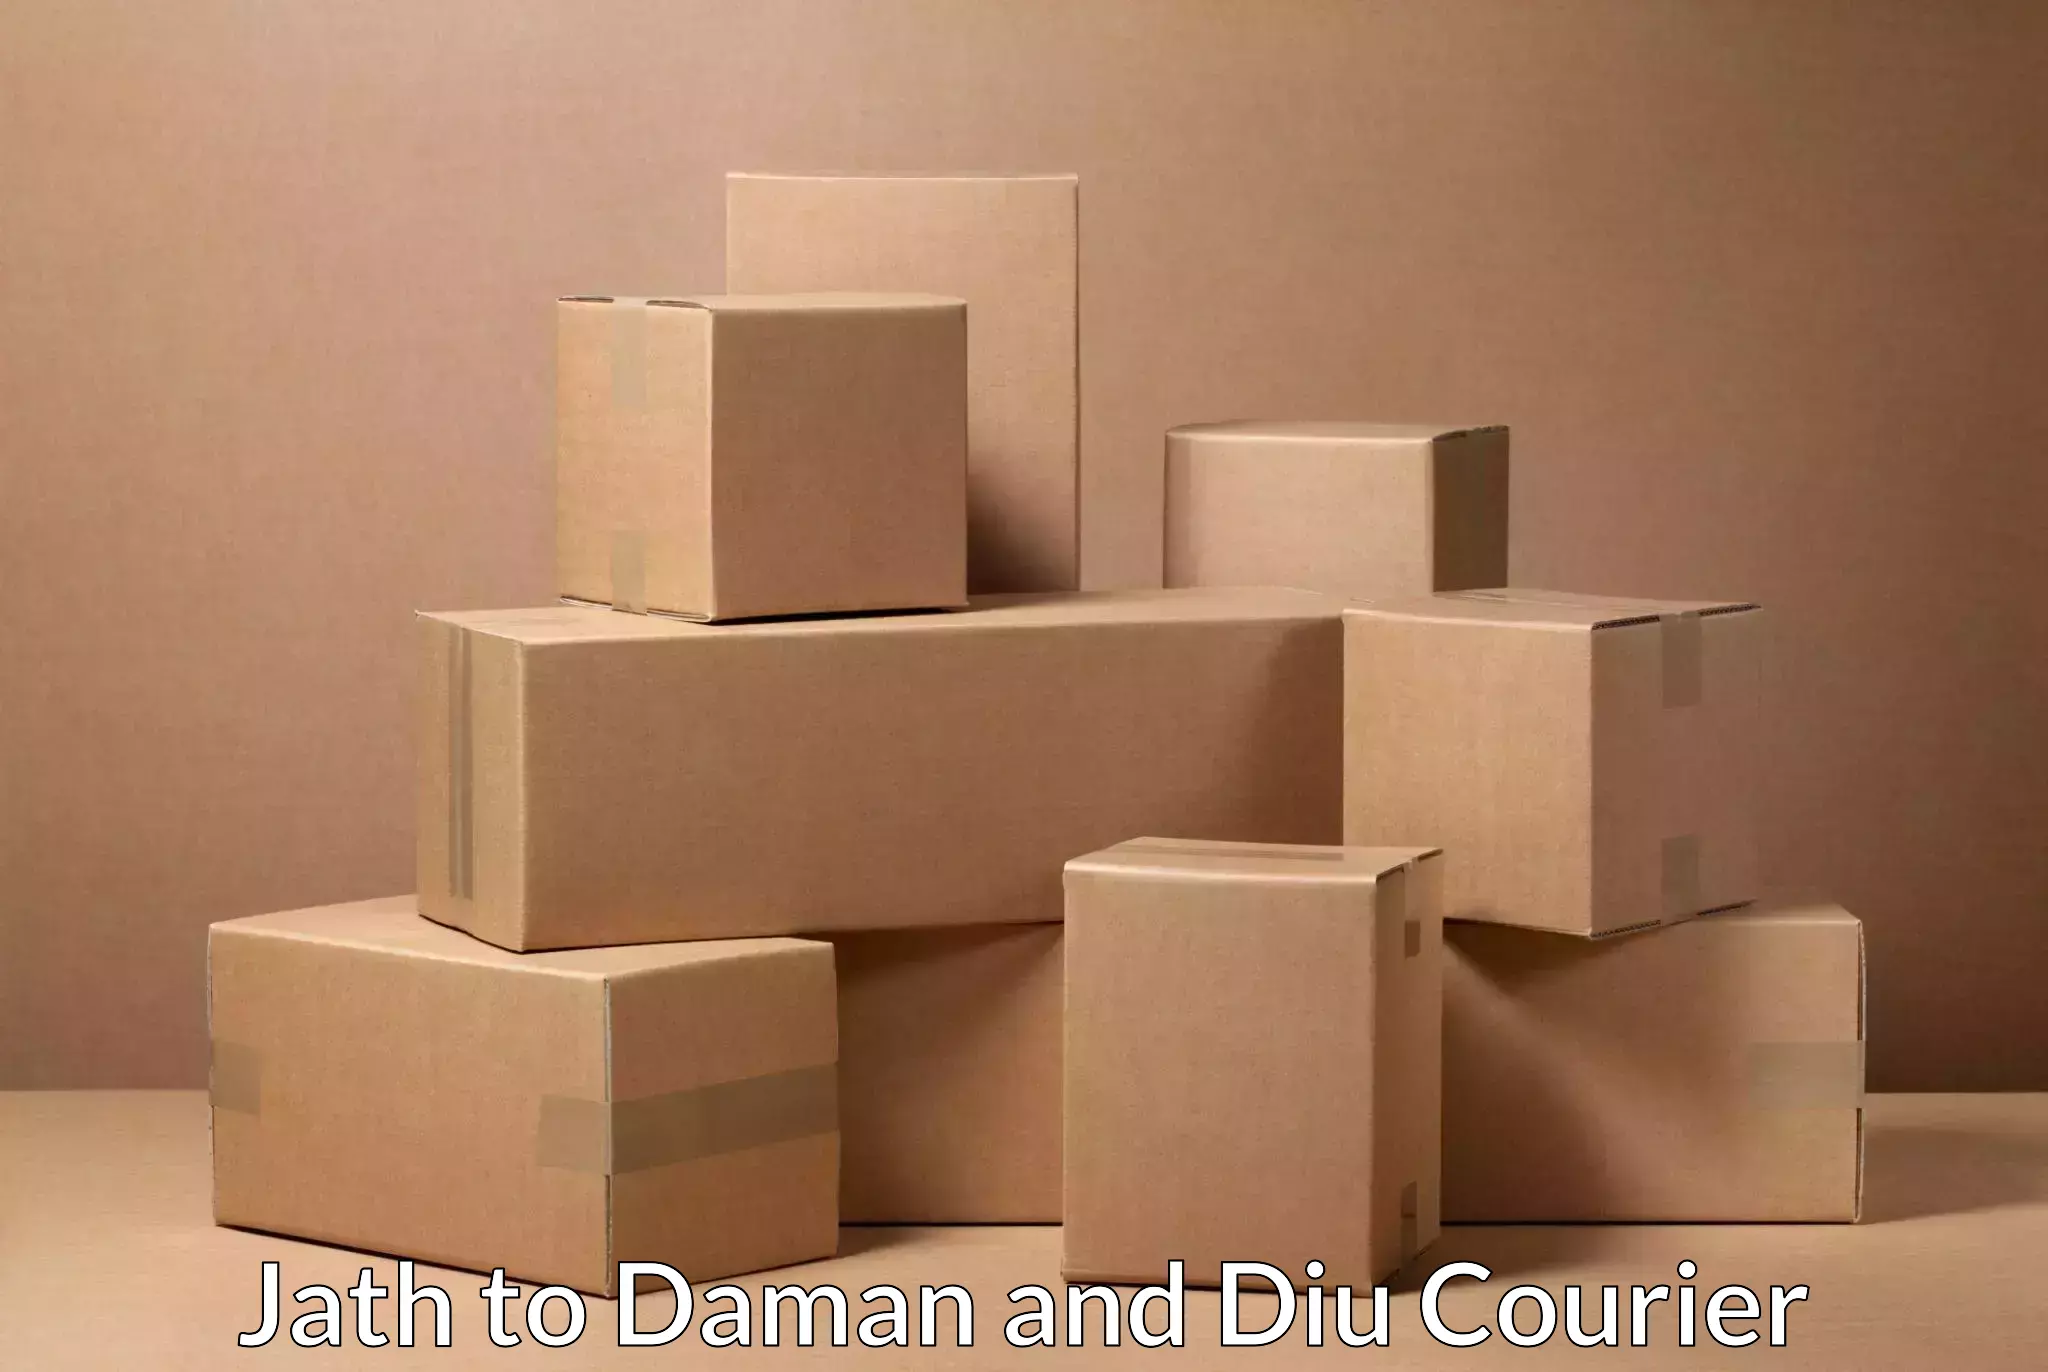 Residential courier service Jath to Daman and Diu